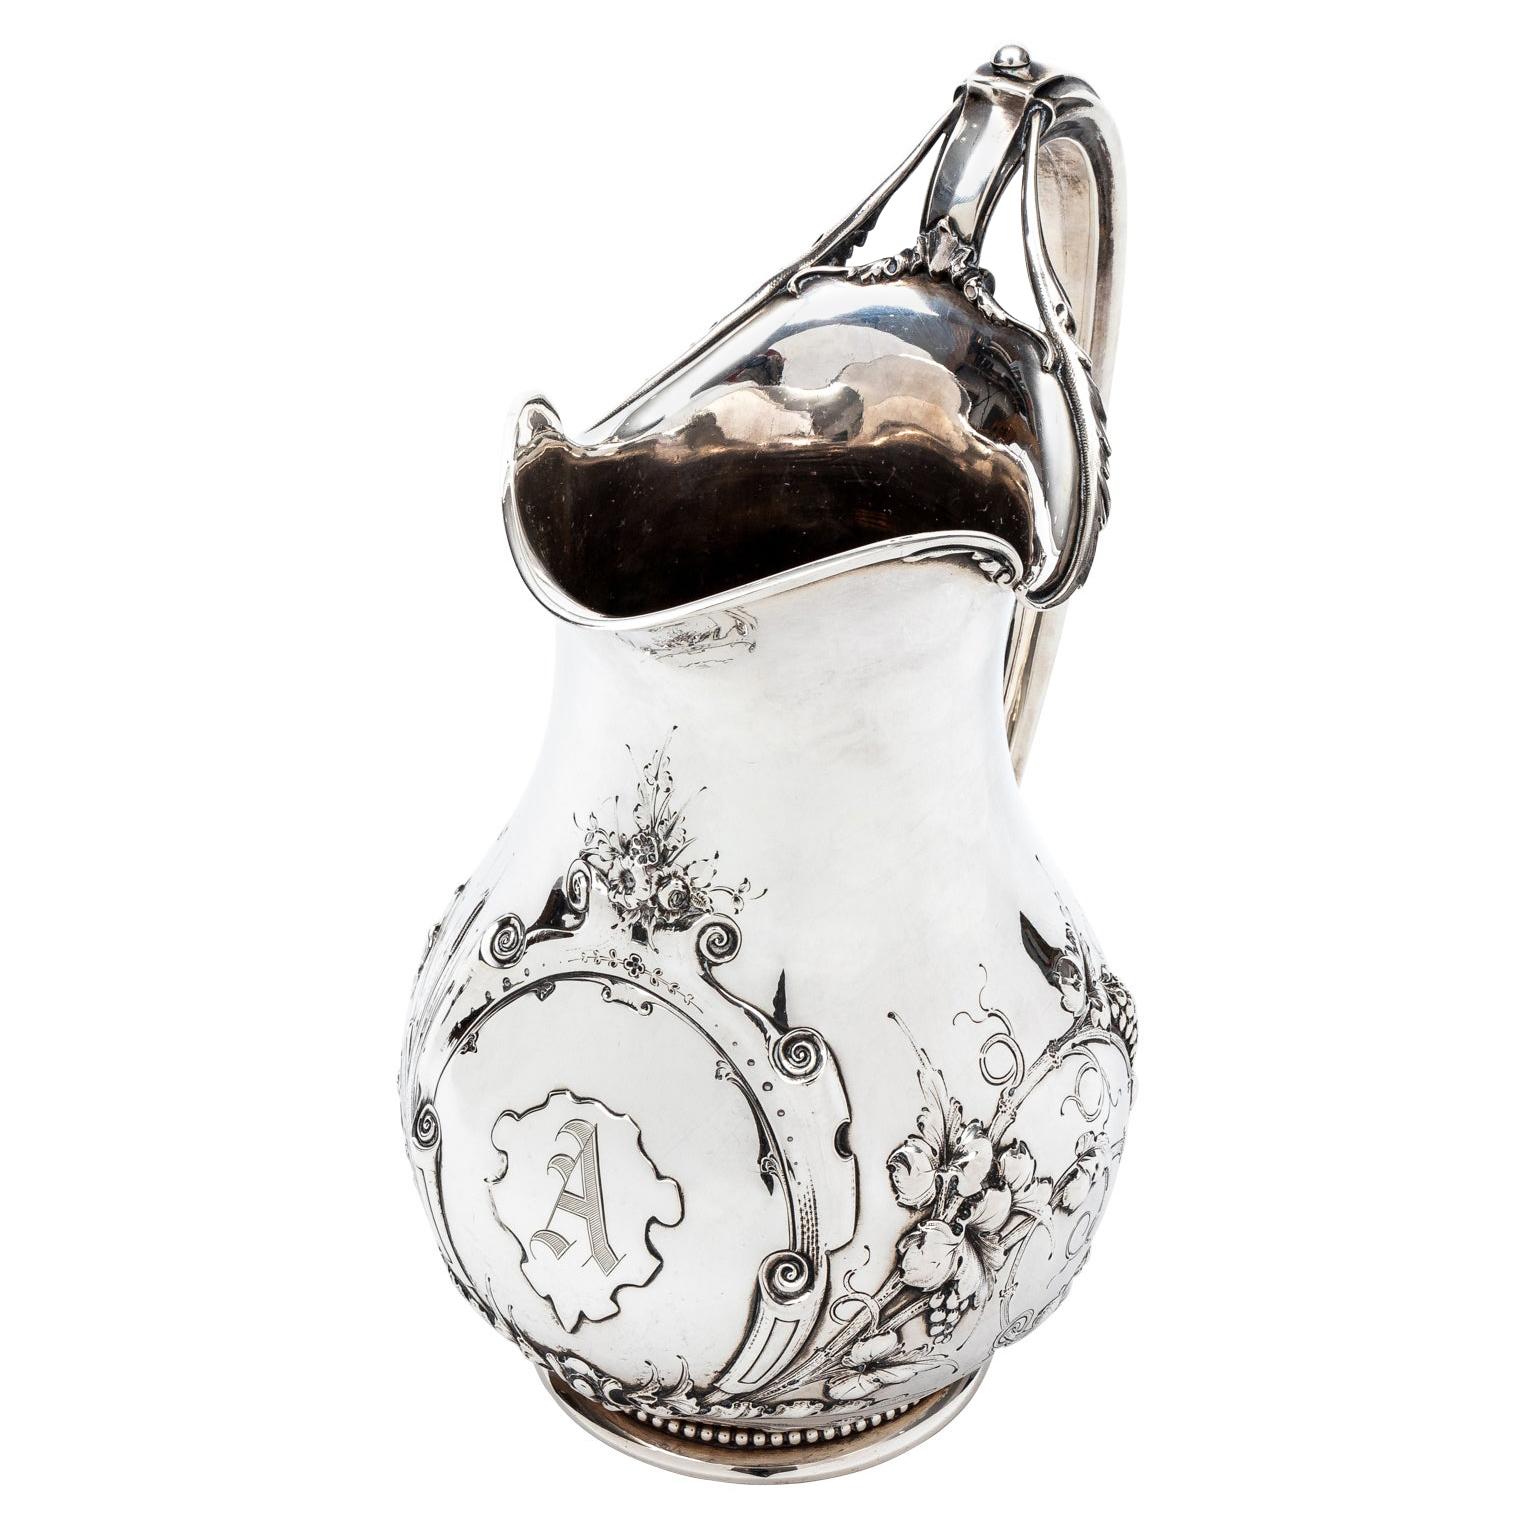 Gorham Repousse Coin Silver Pitcher